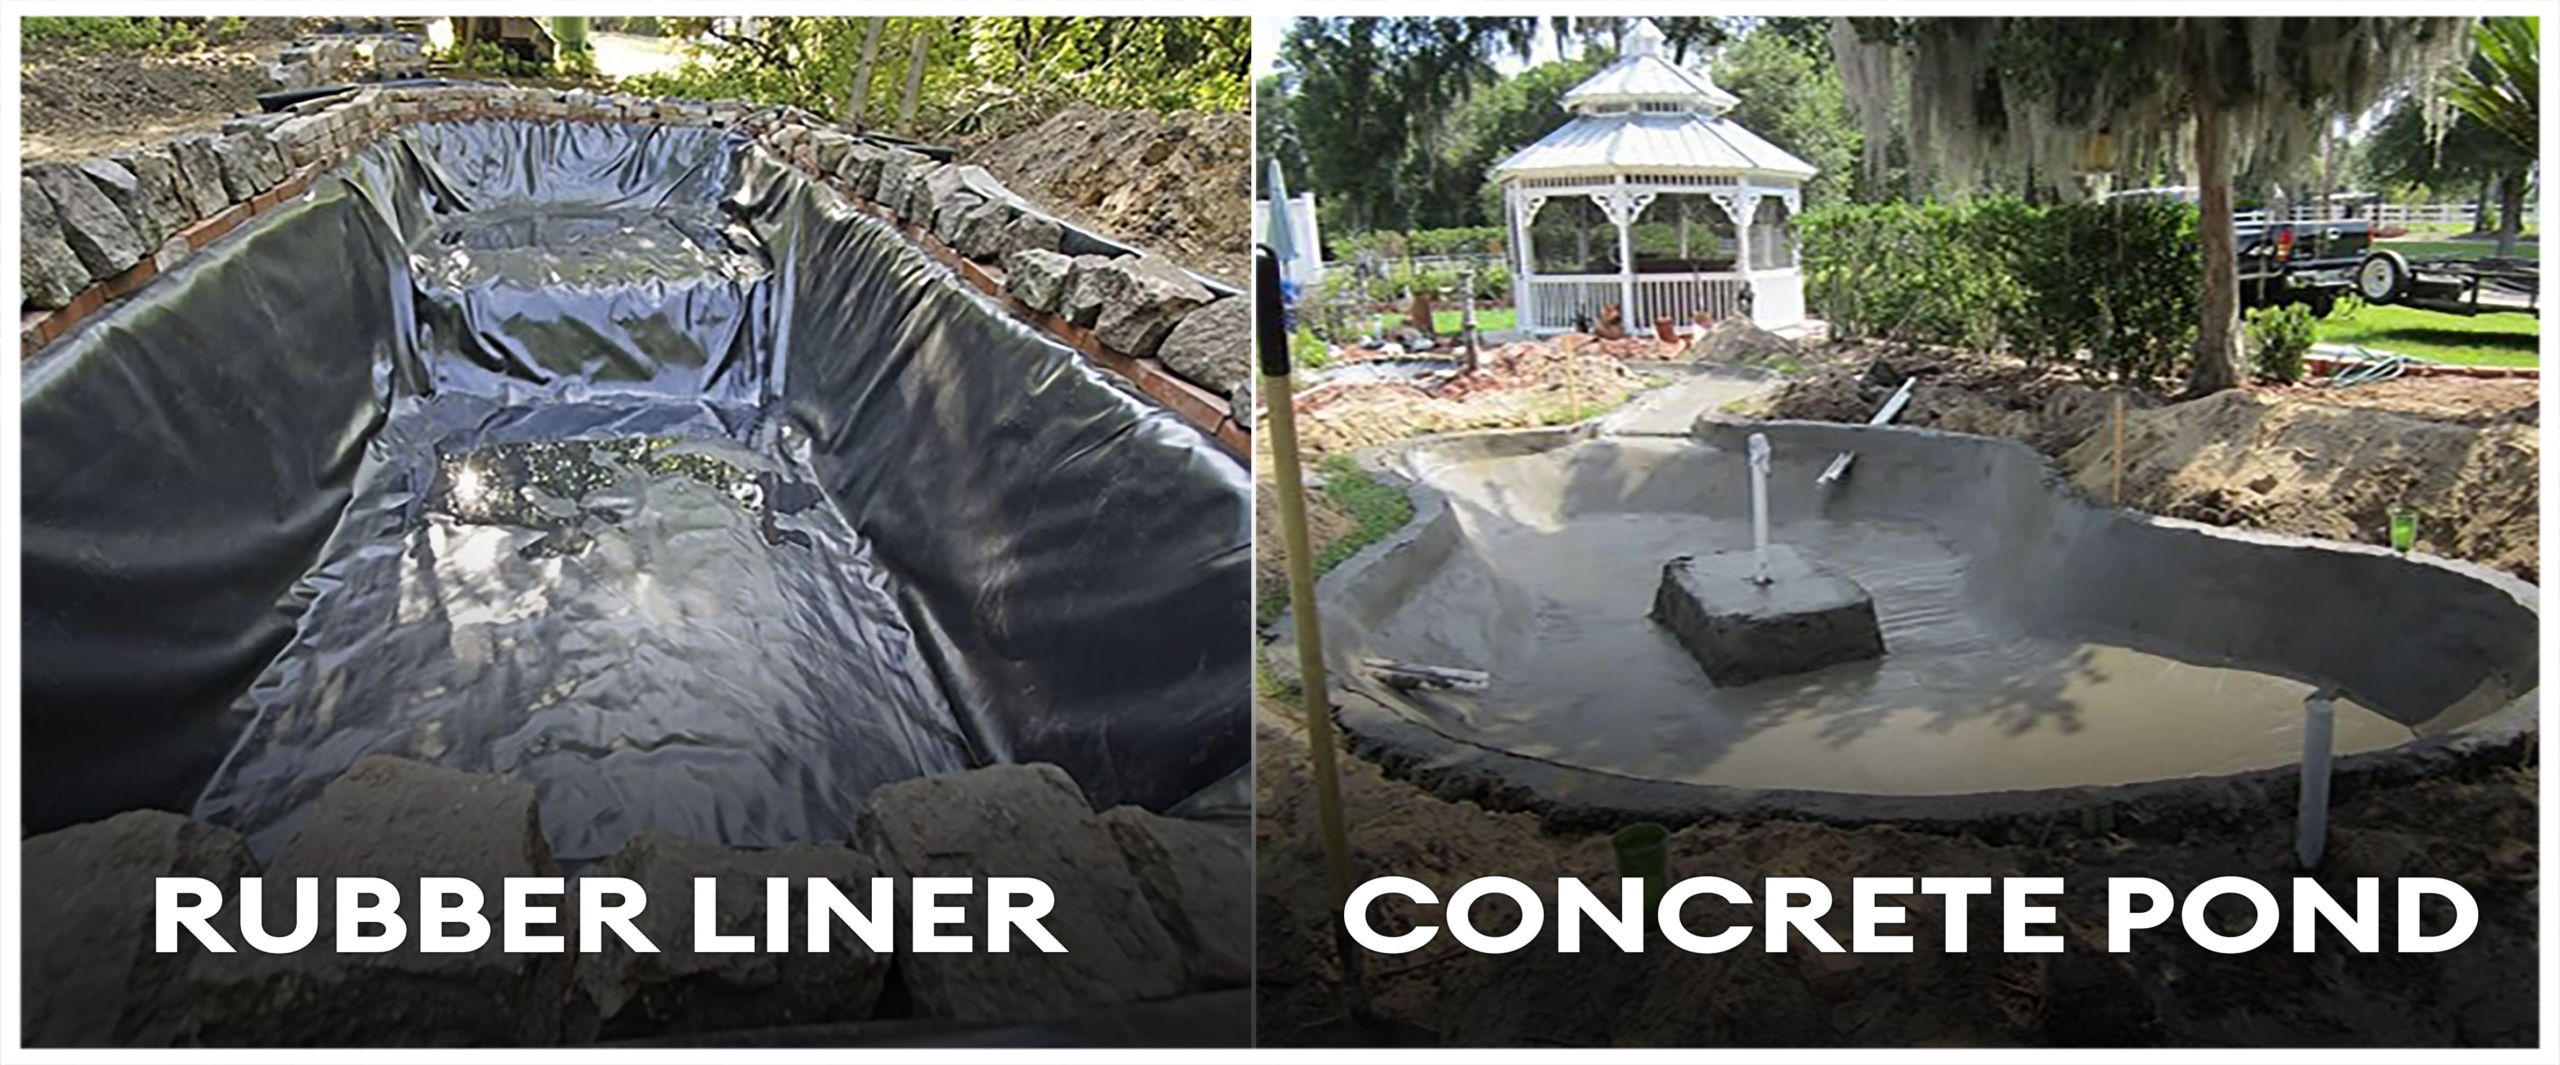 Which pond is better, a rubber liner or a concrete pond-min